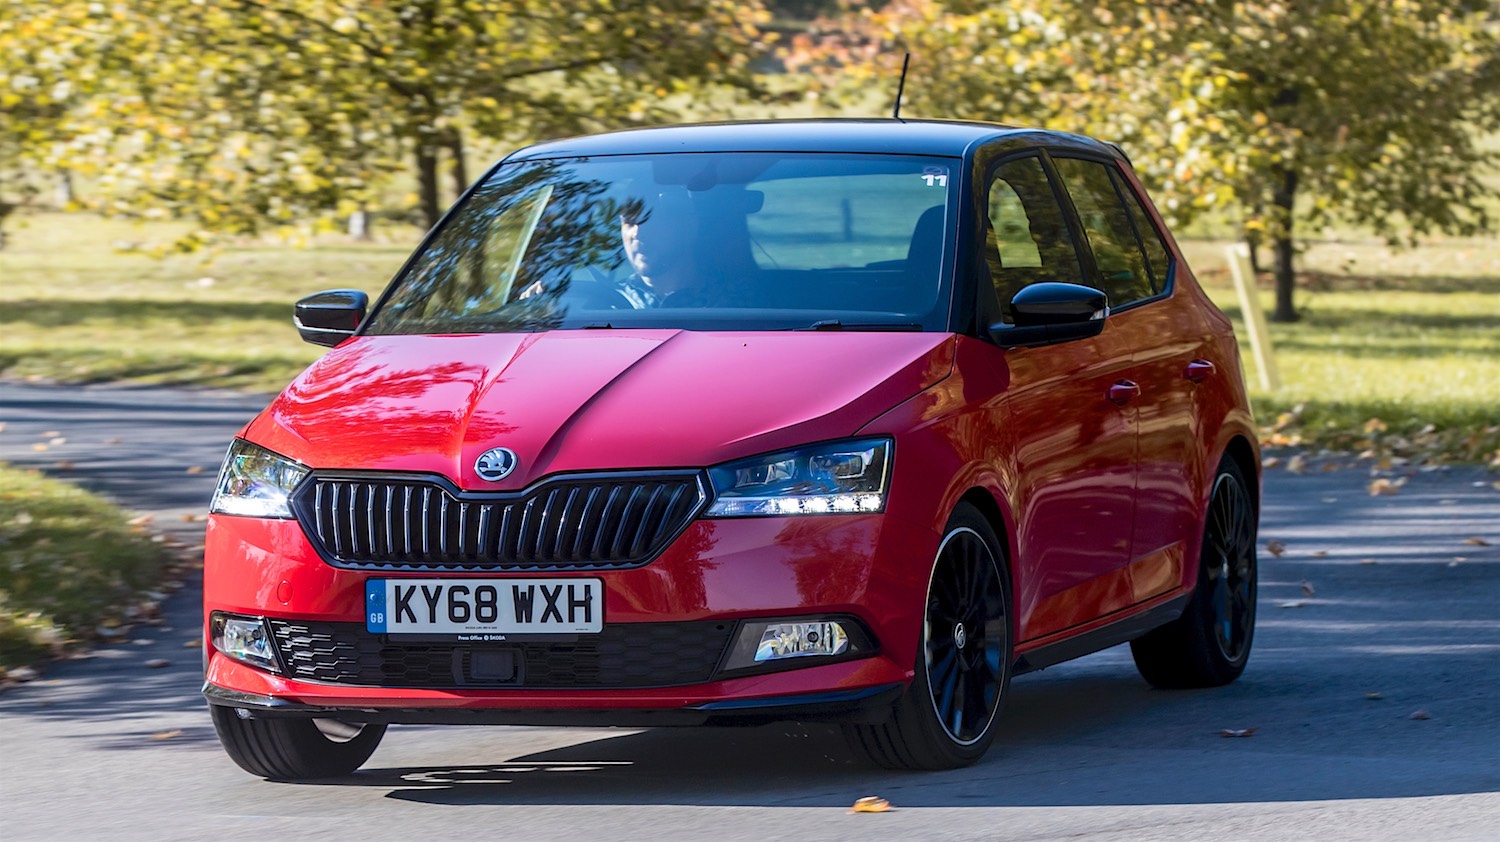 Tim Barnes Clay reviews the upated Skoda Fabia Monte Carlo for drive 6